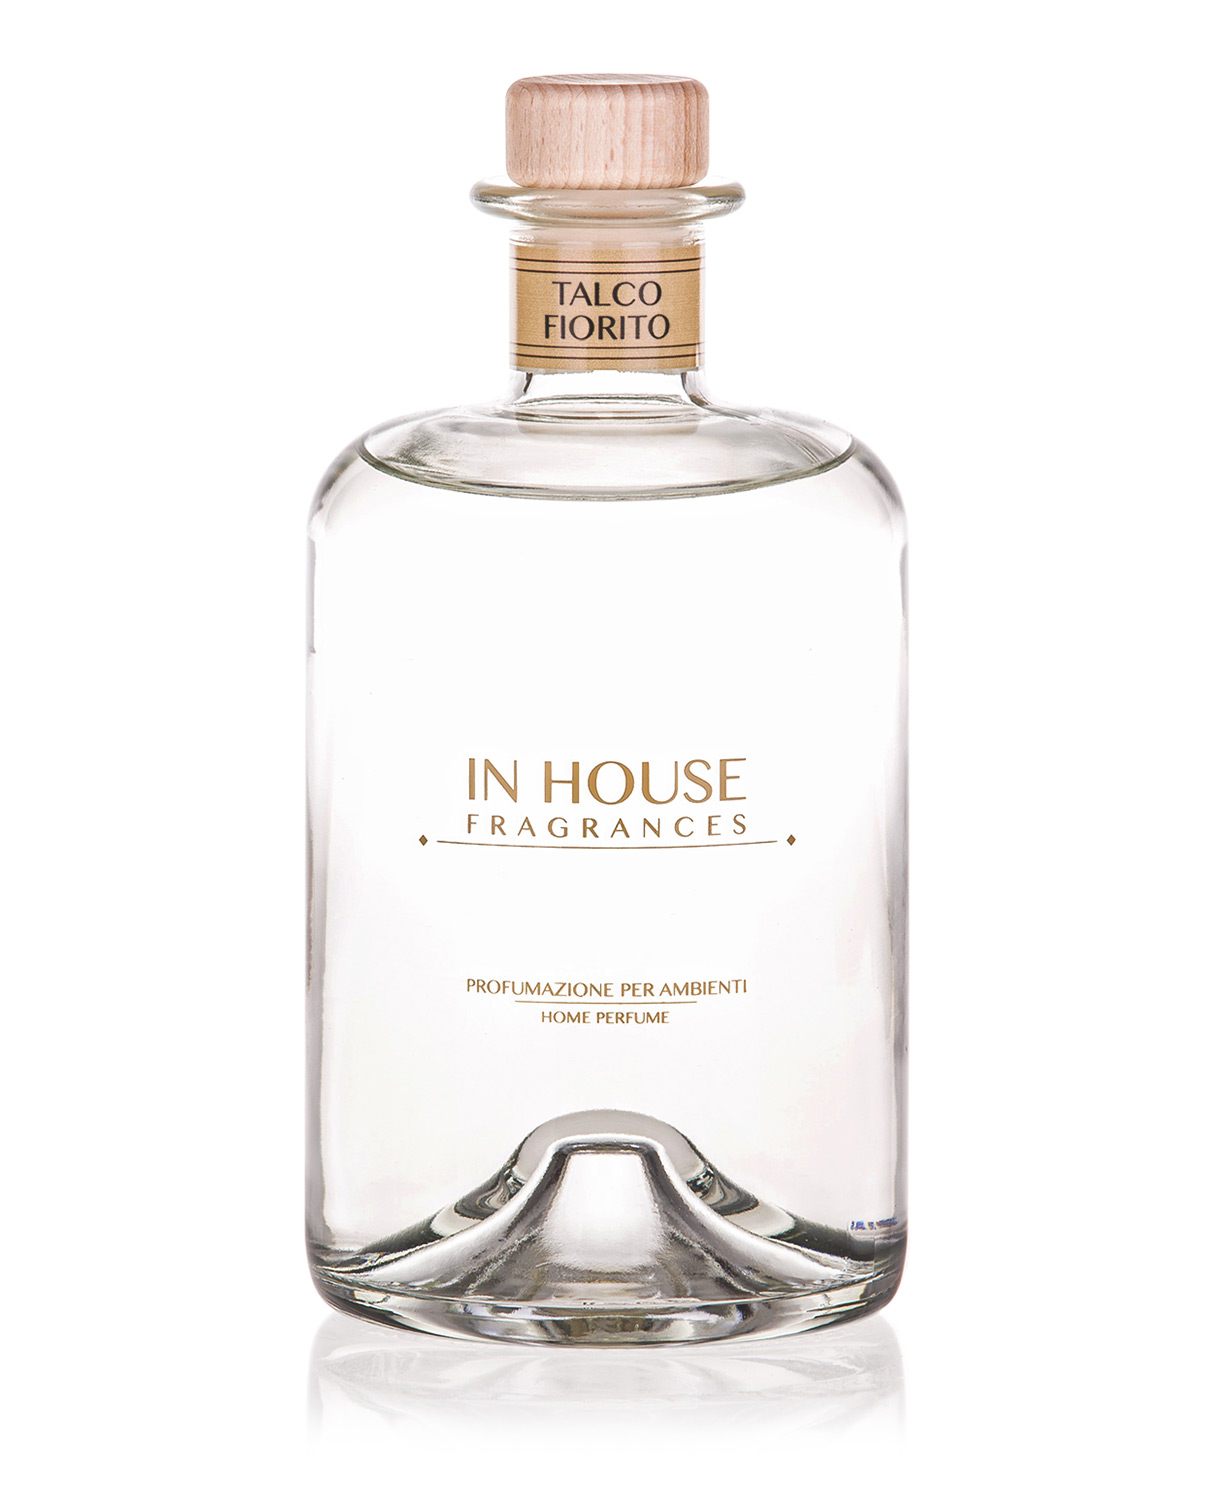 In House Fragrances - Fiorito 500ml - online Parfums